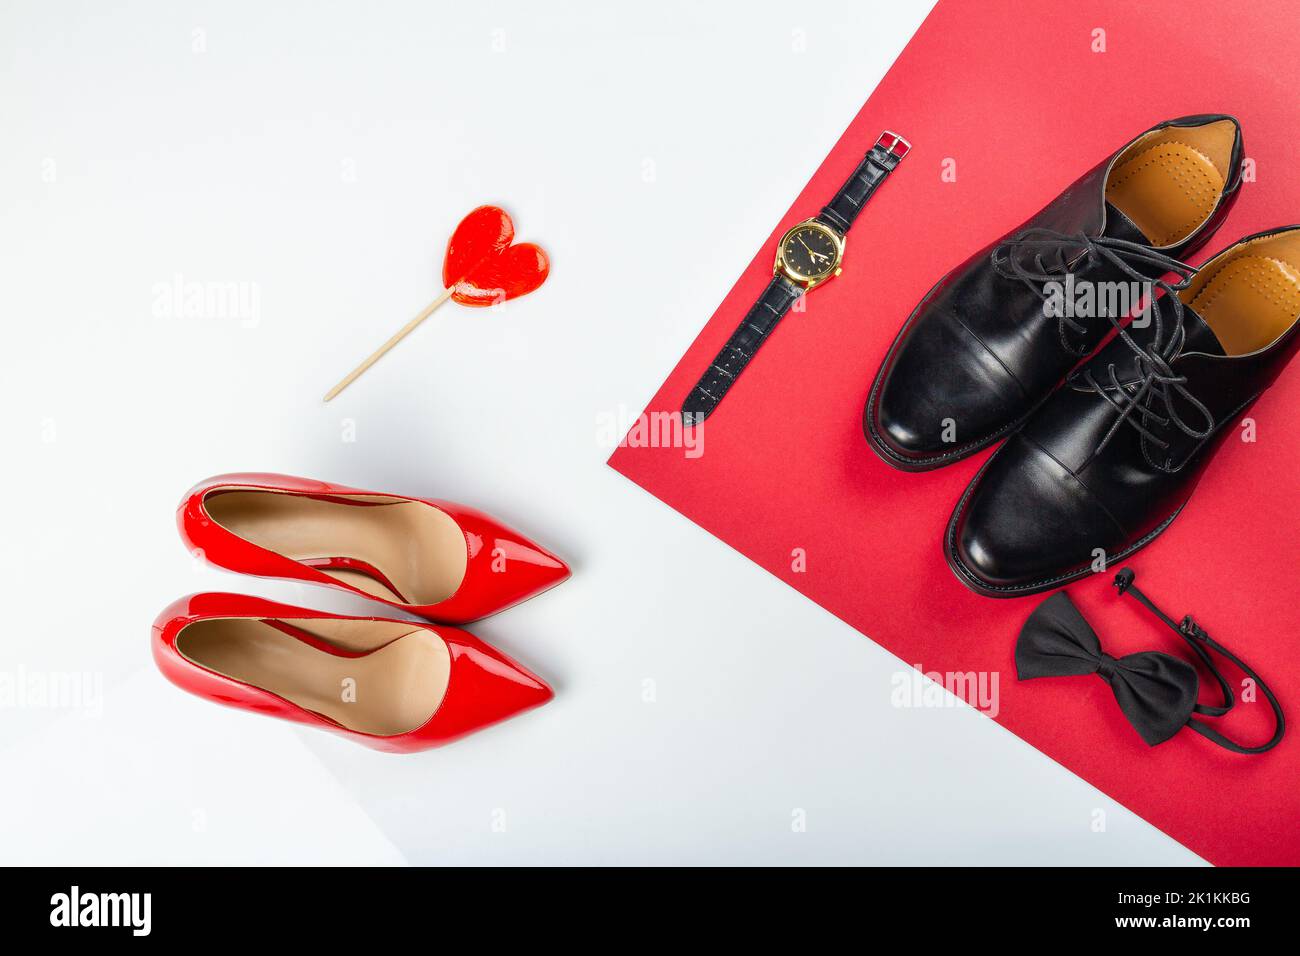 Top view mens and womens shoes on white background. Red and black shoes with lollipop and hand watch. Stock Photo